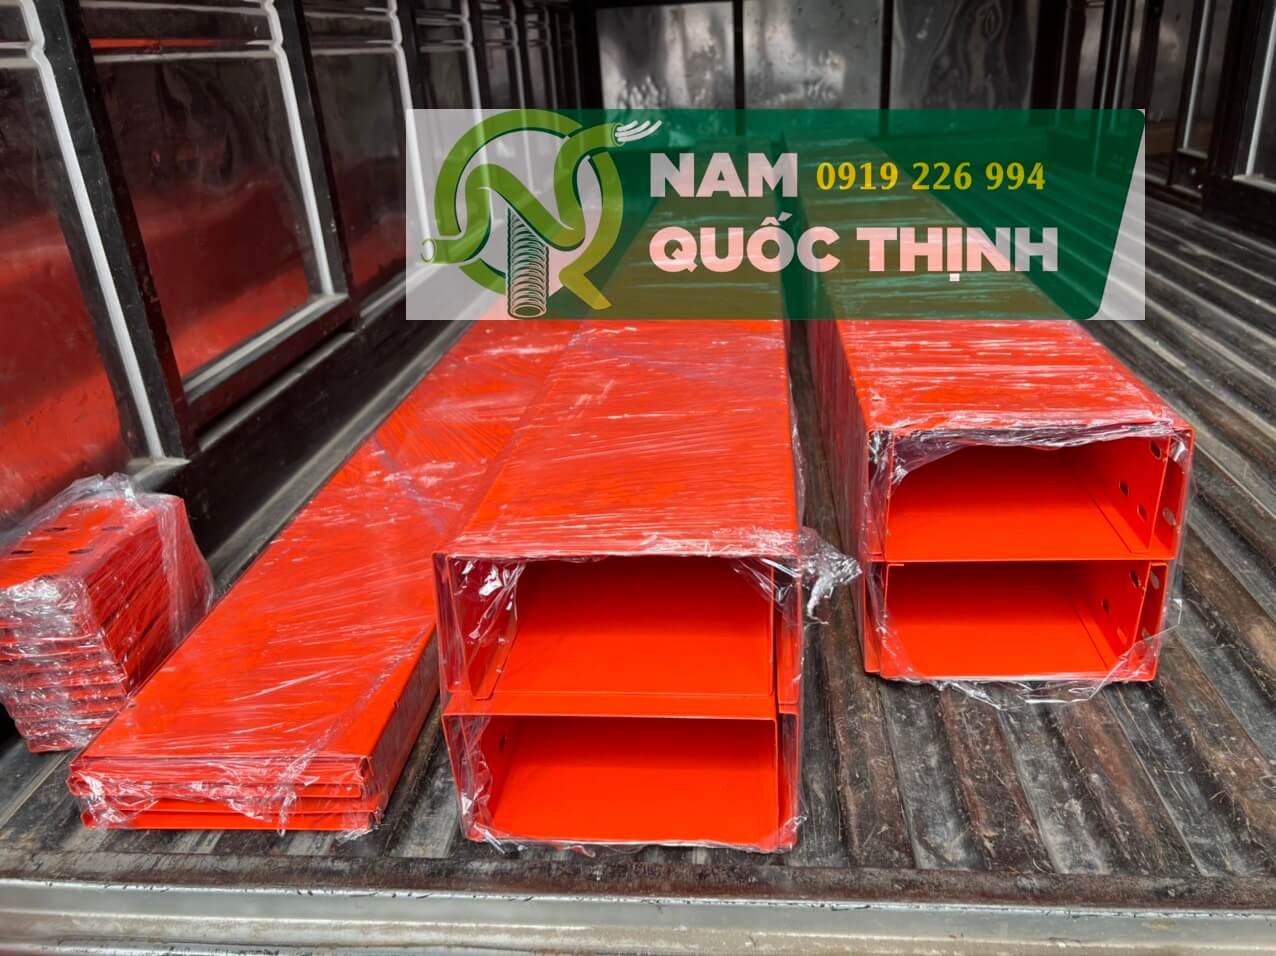 cable trunking 200x100x1.2 mm mau cam son tinh dien co nap